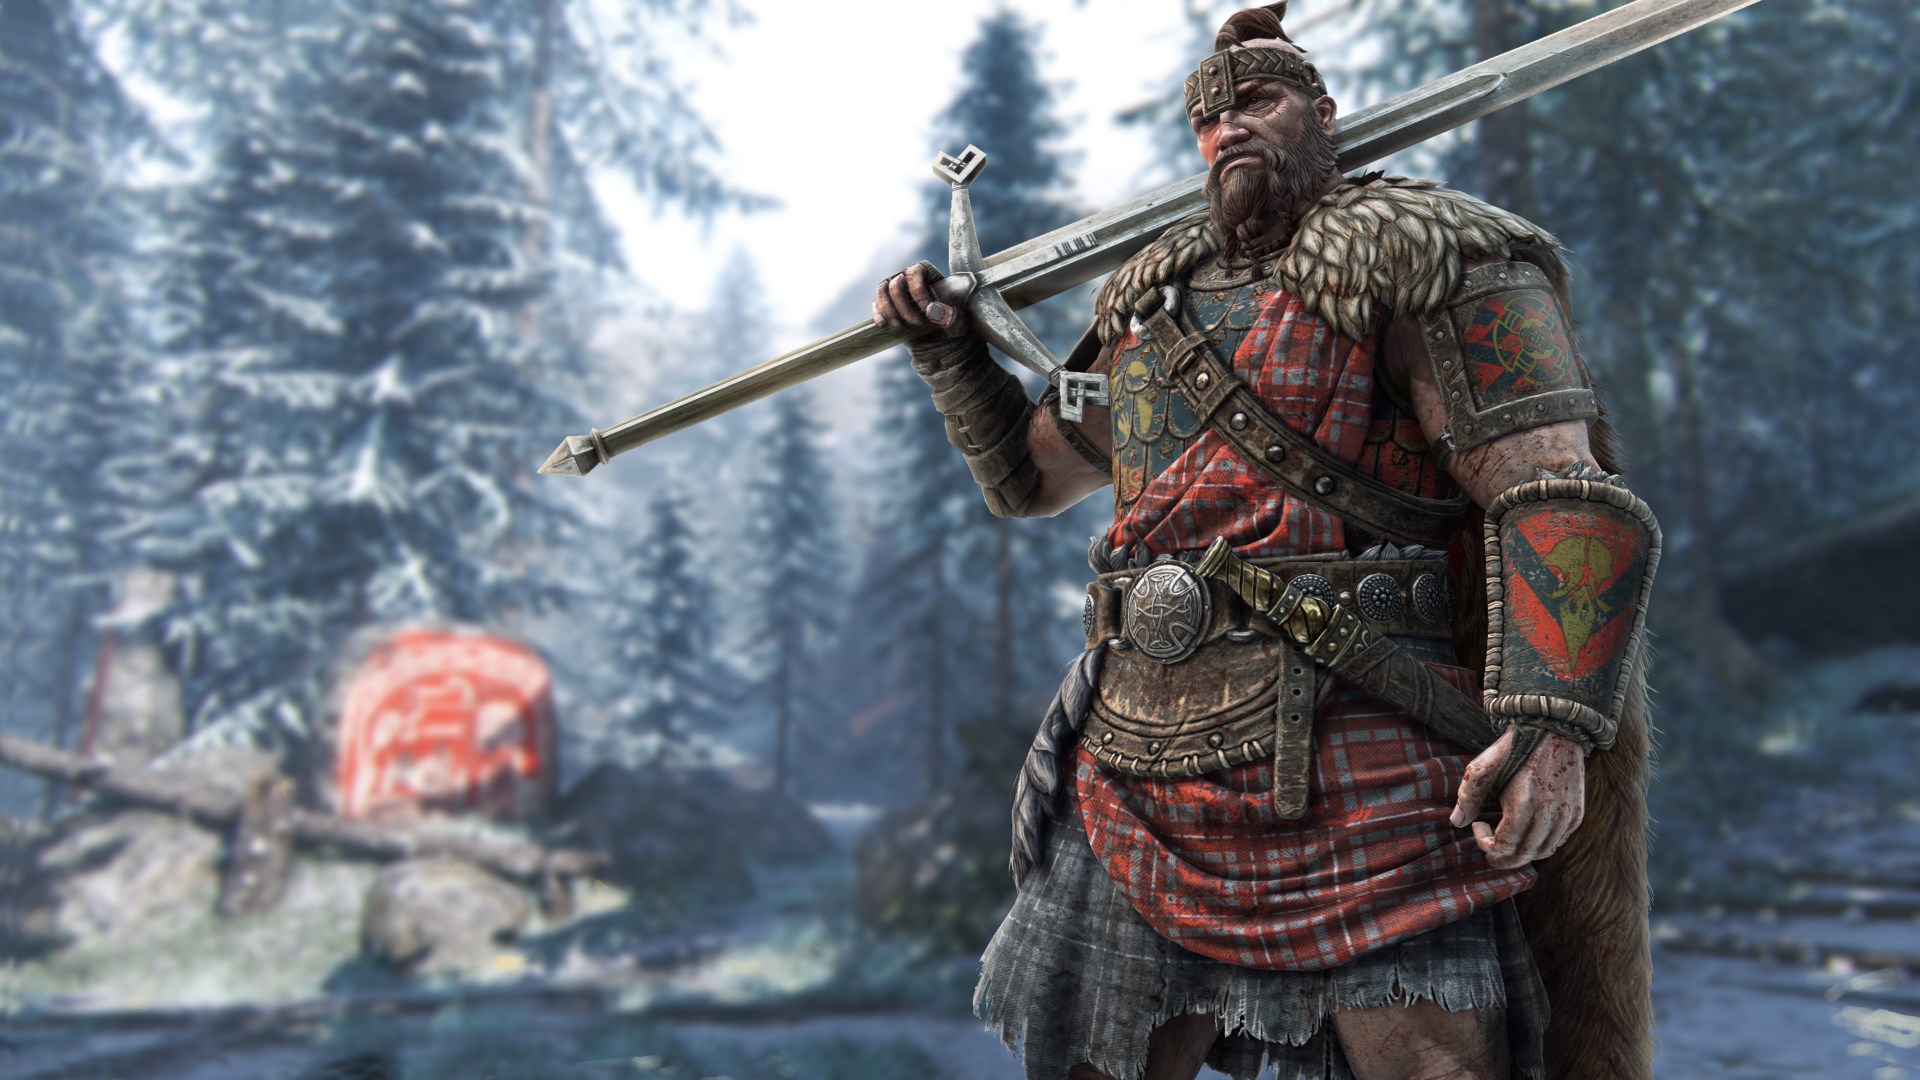 For Honor season 3 introduces the Gladiator, Highlander, and 1v1 tournaments